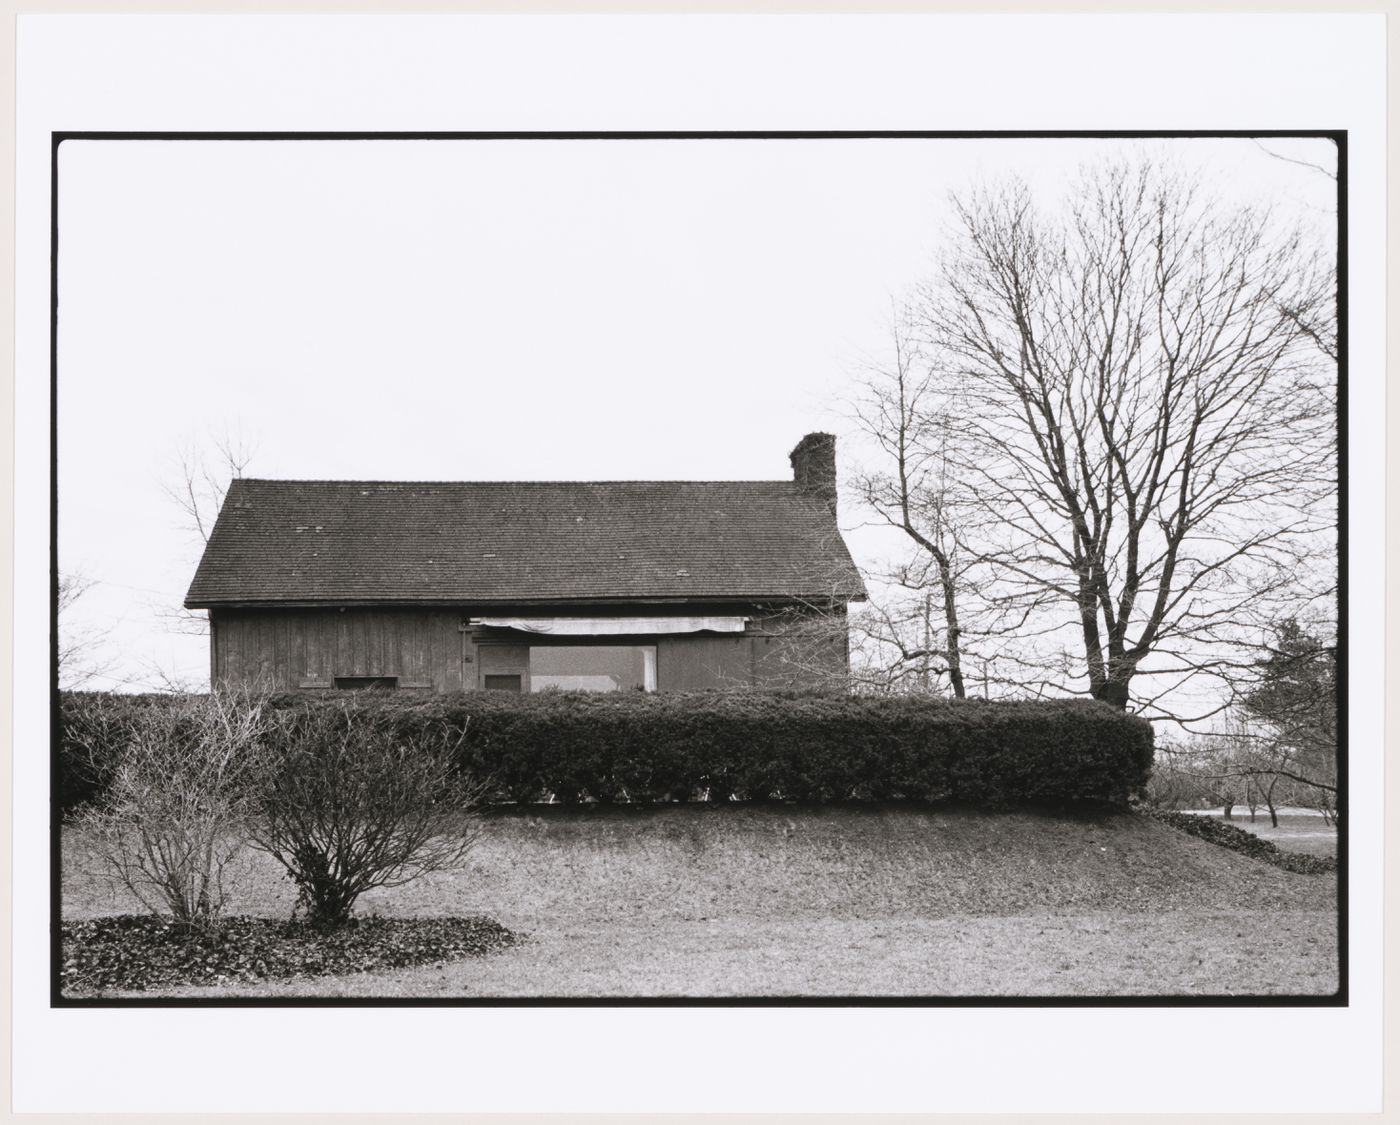 Exterior view of Mary Callery Barn with shrubs, Huntington, Long Island, New York, United States